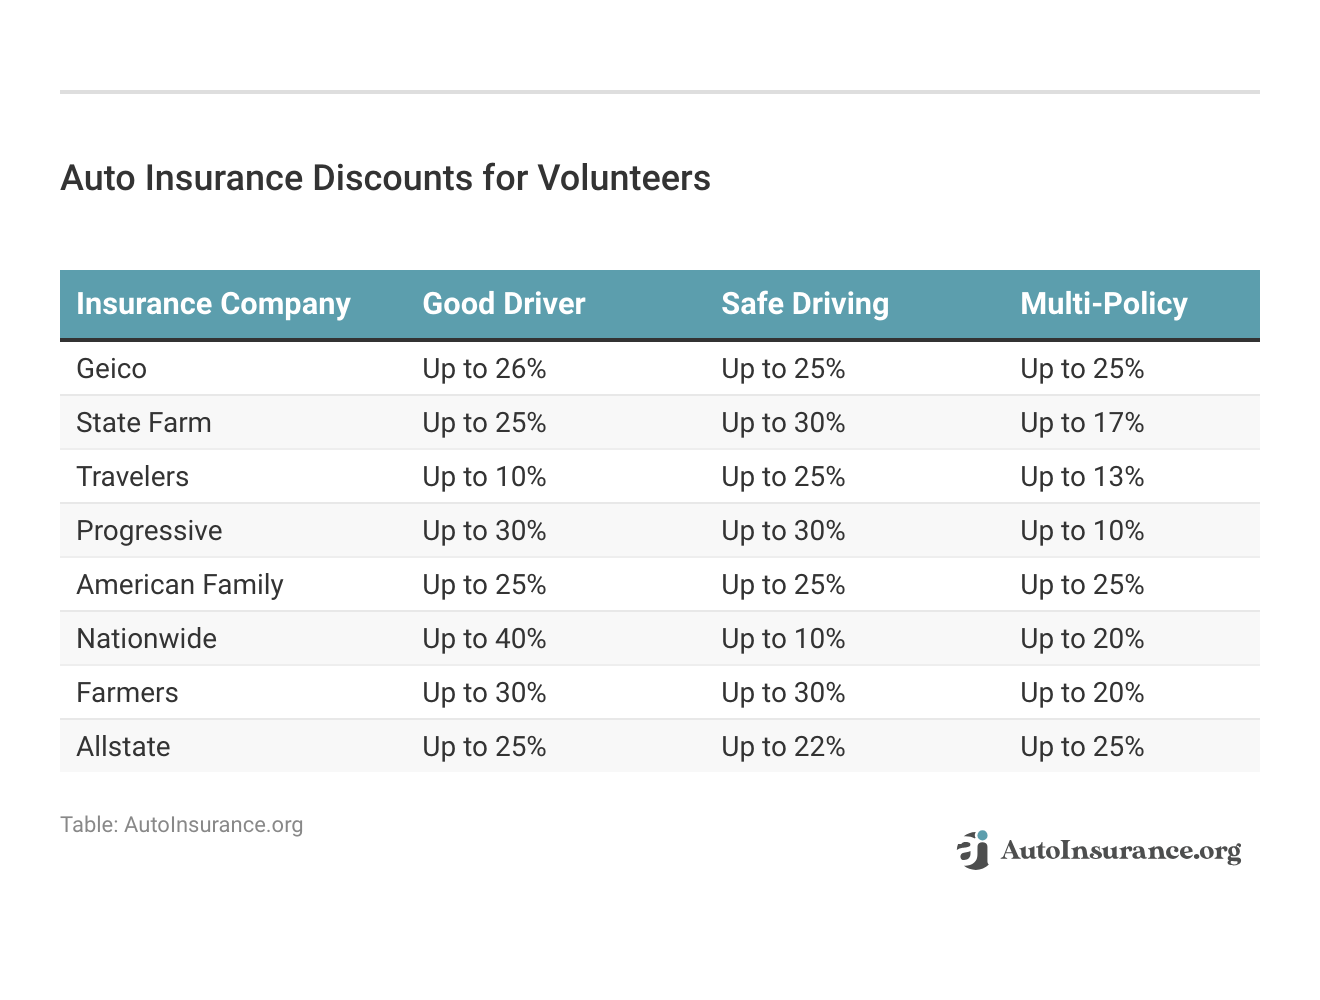 <h3>Auto Insurance Discounts for Volunteers</h3>